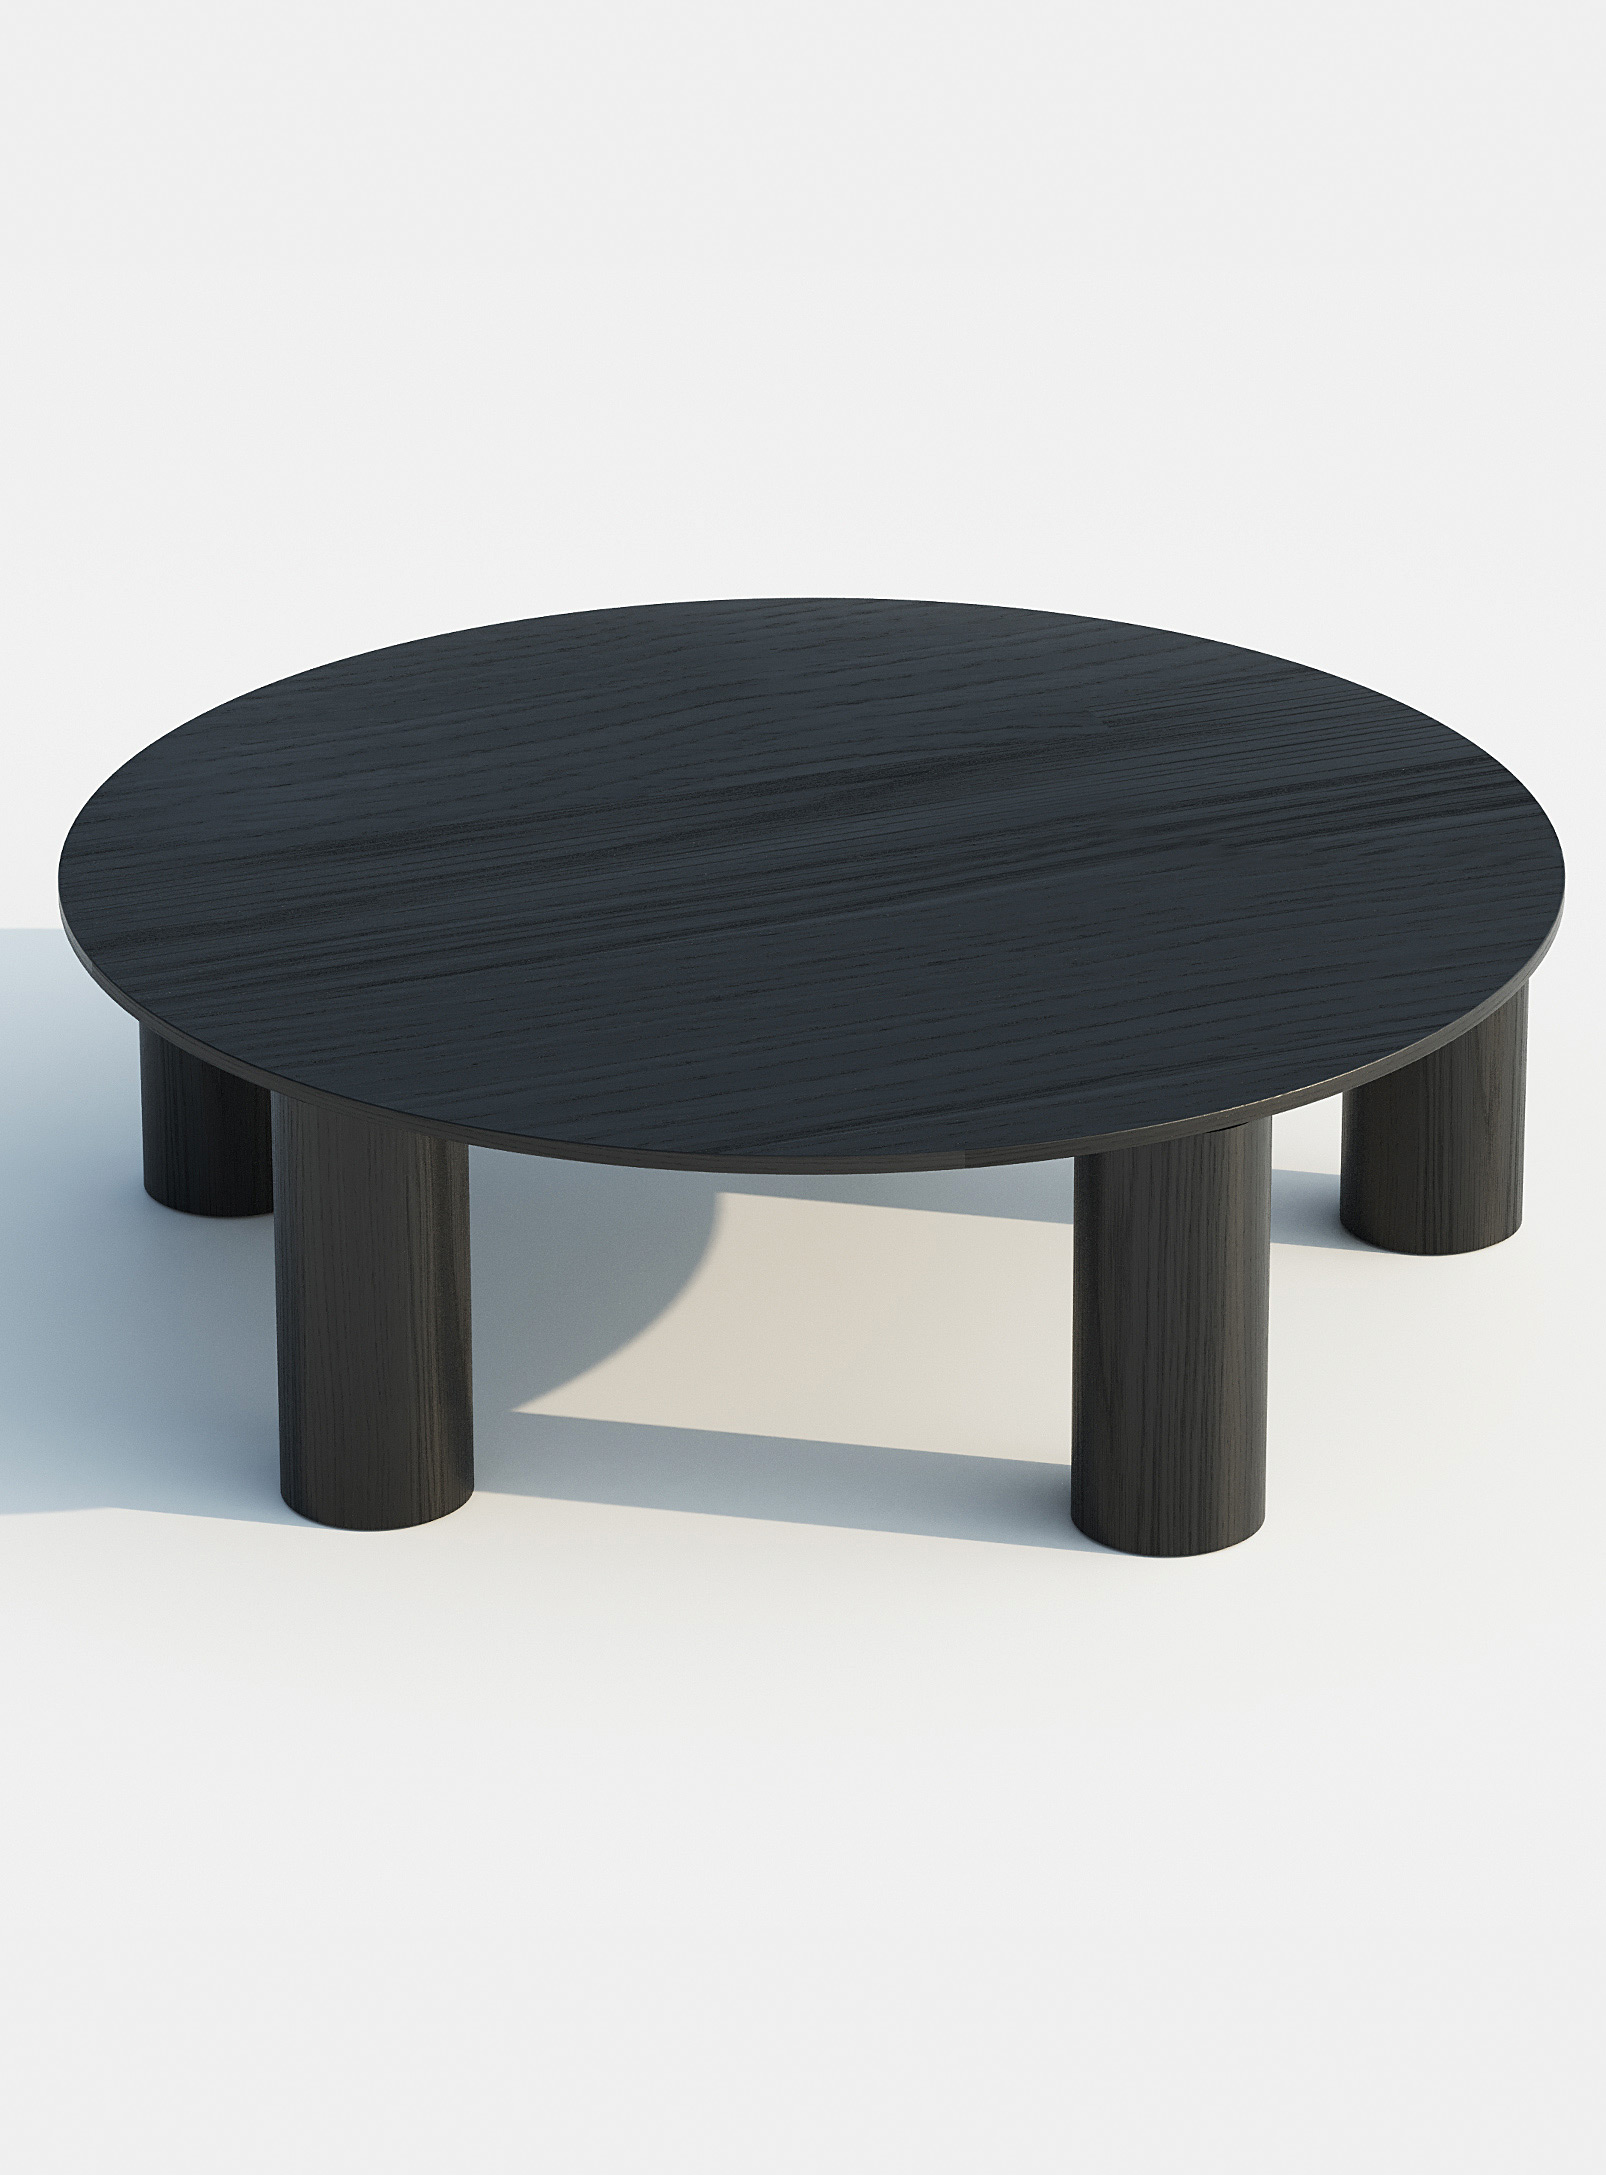 Found L-phant Living Room Table In Black